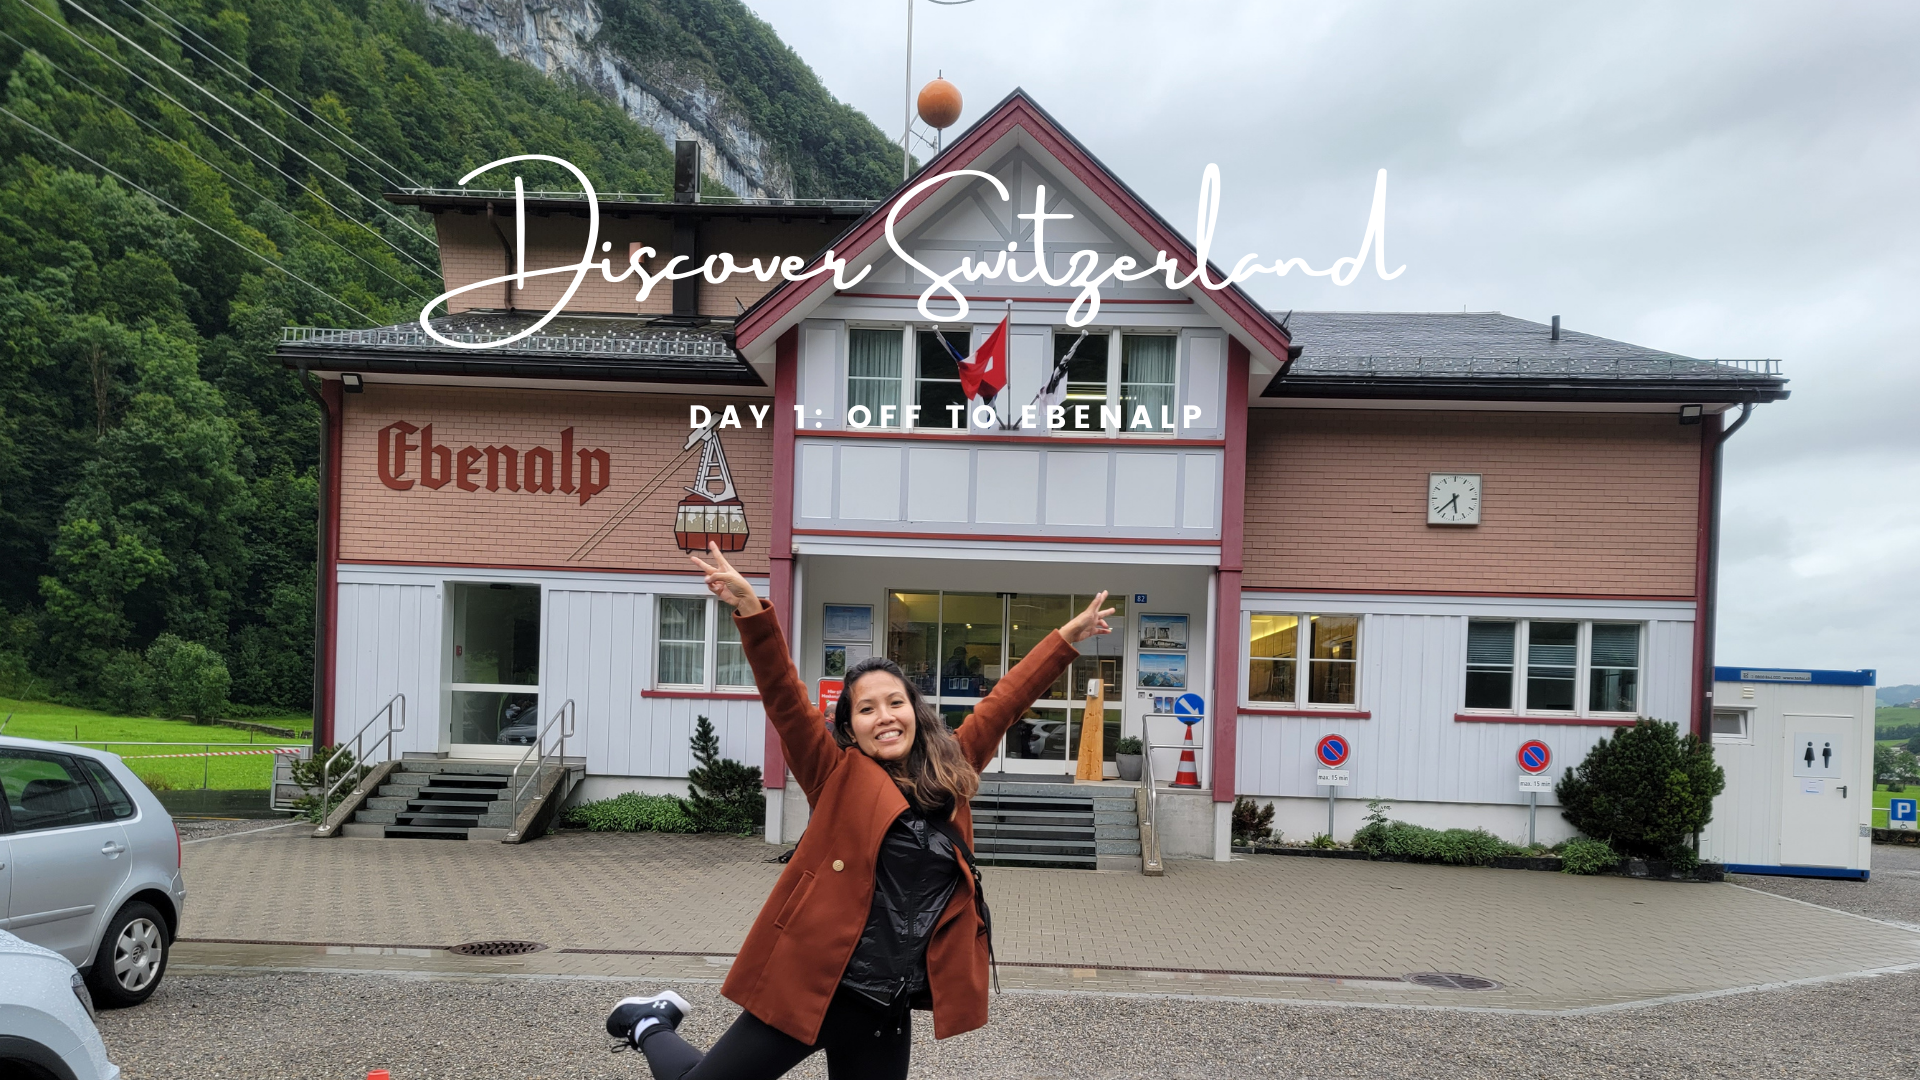 Discover Switzerland: Day 1 – Off to Ebenalp